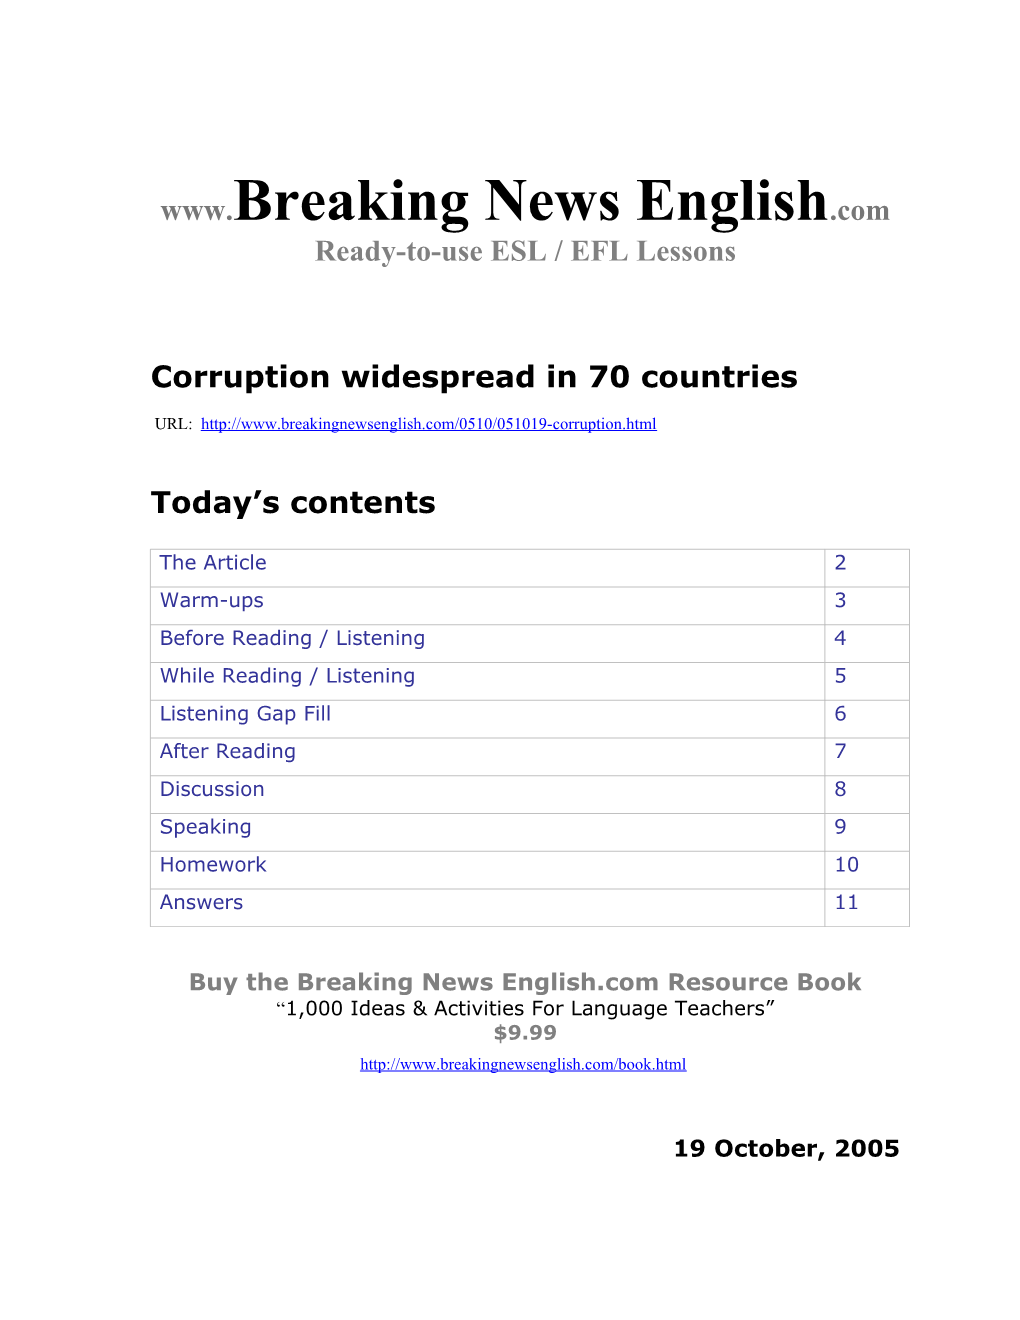 Corruption Widespread in 70 Countries